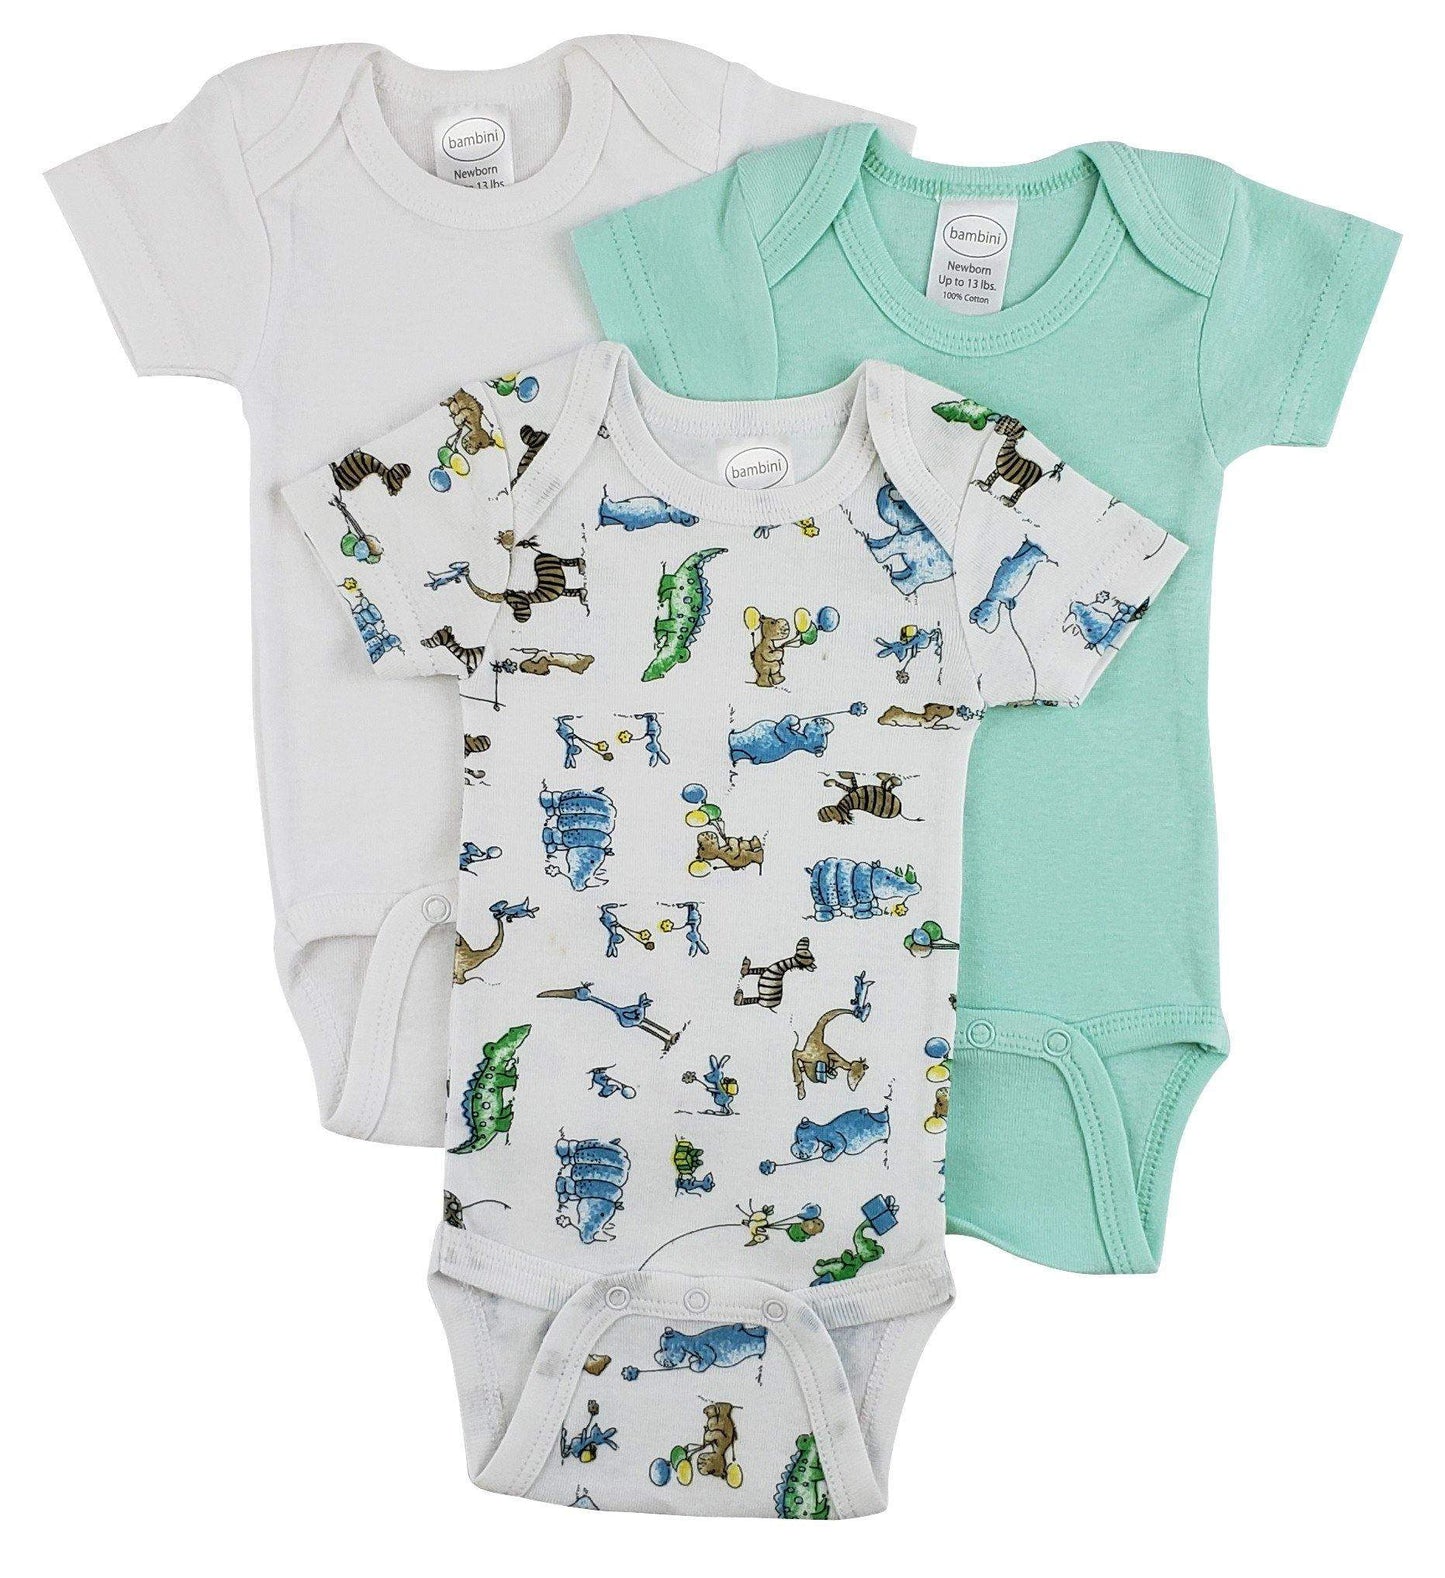 3 Pack Neutral Rib Knit Short Sleeve Onesie(NB,S,M,L)-Bambini-Baby,Baby Clothes,Baby Onesies